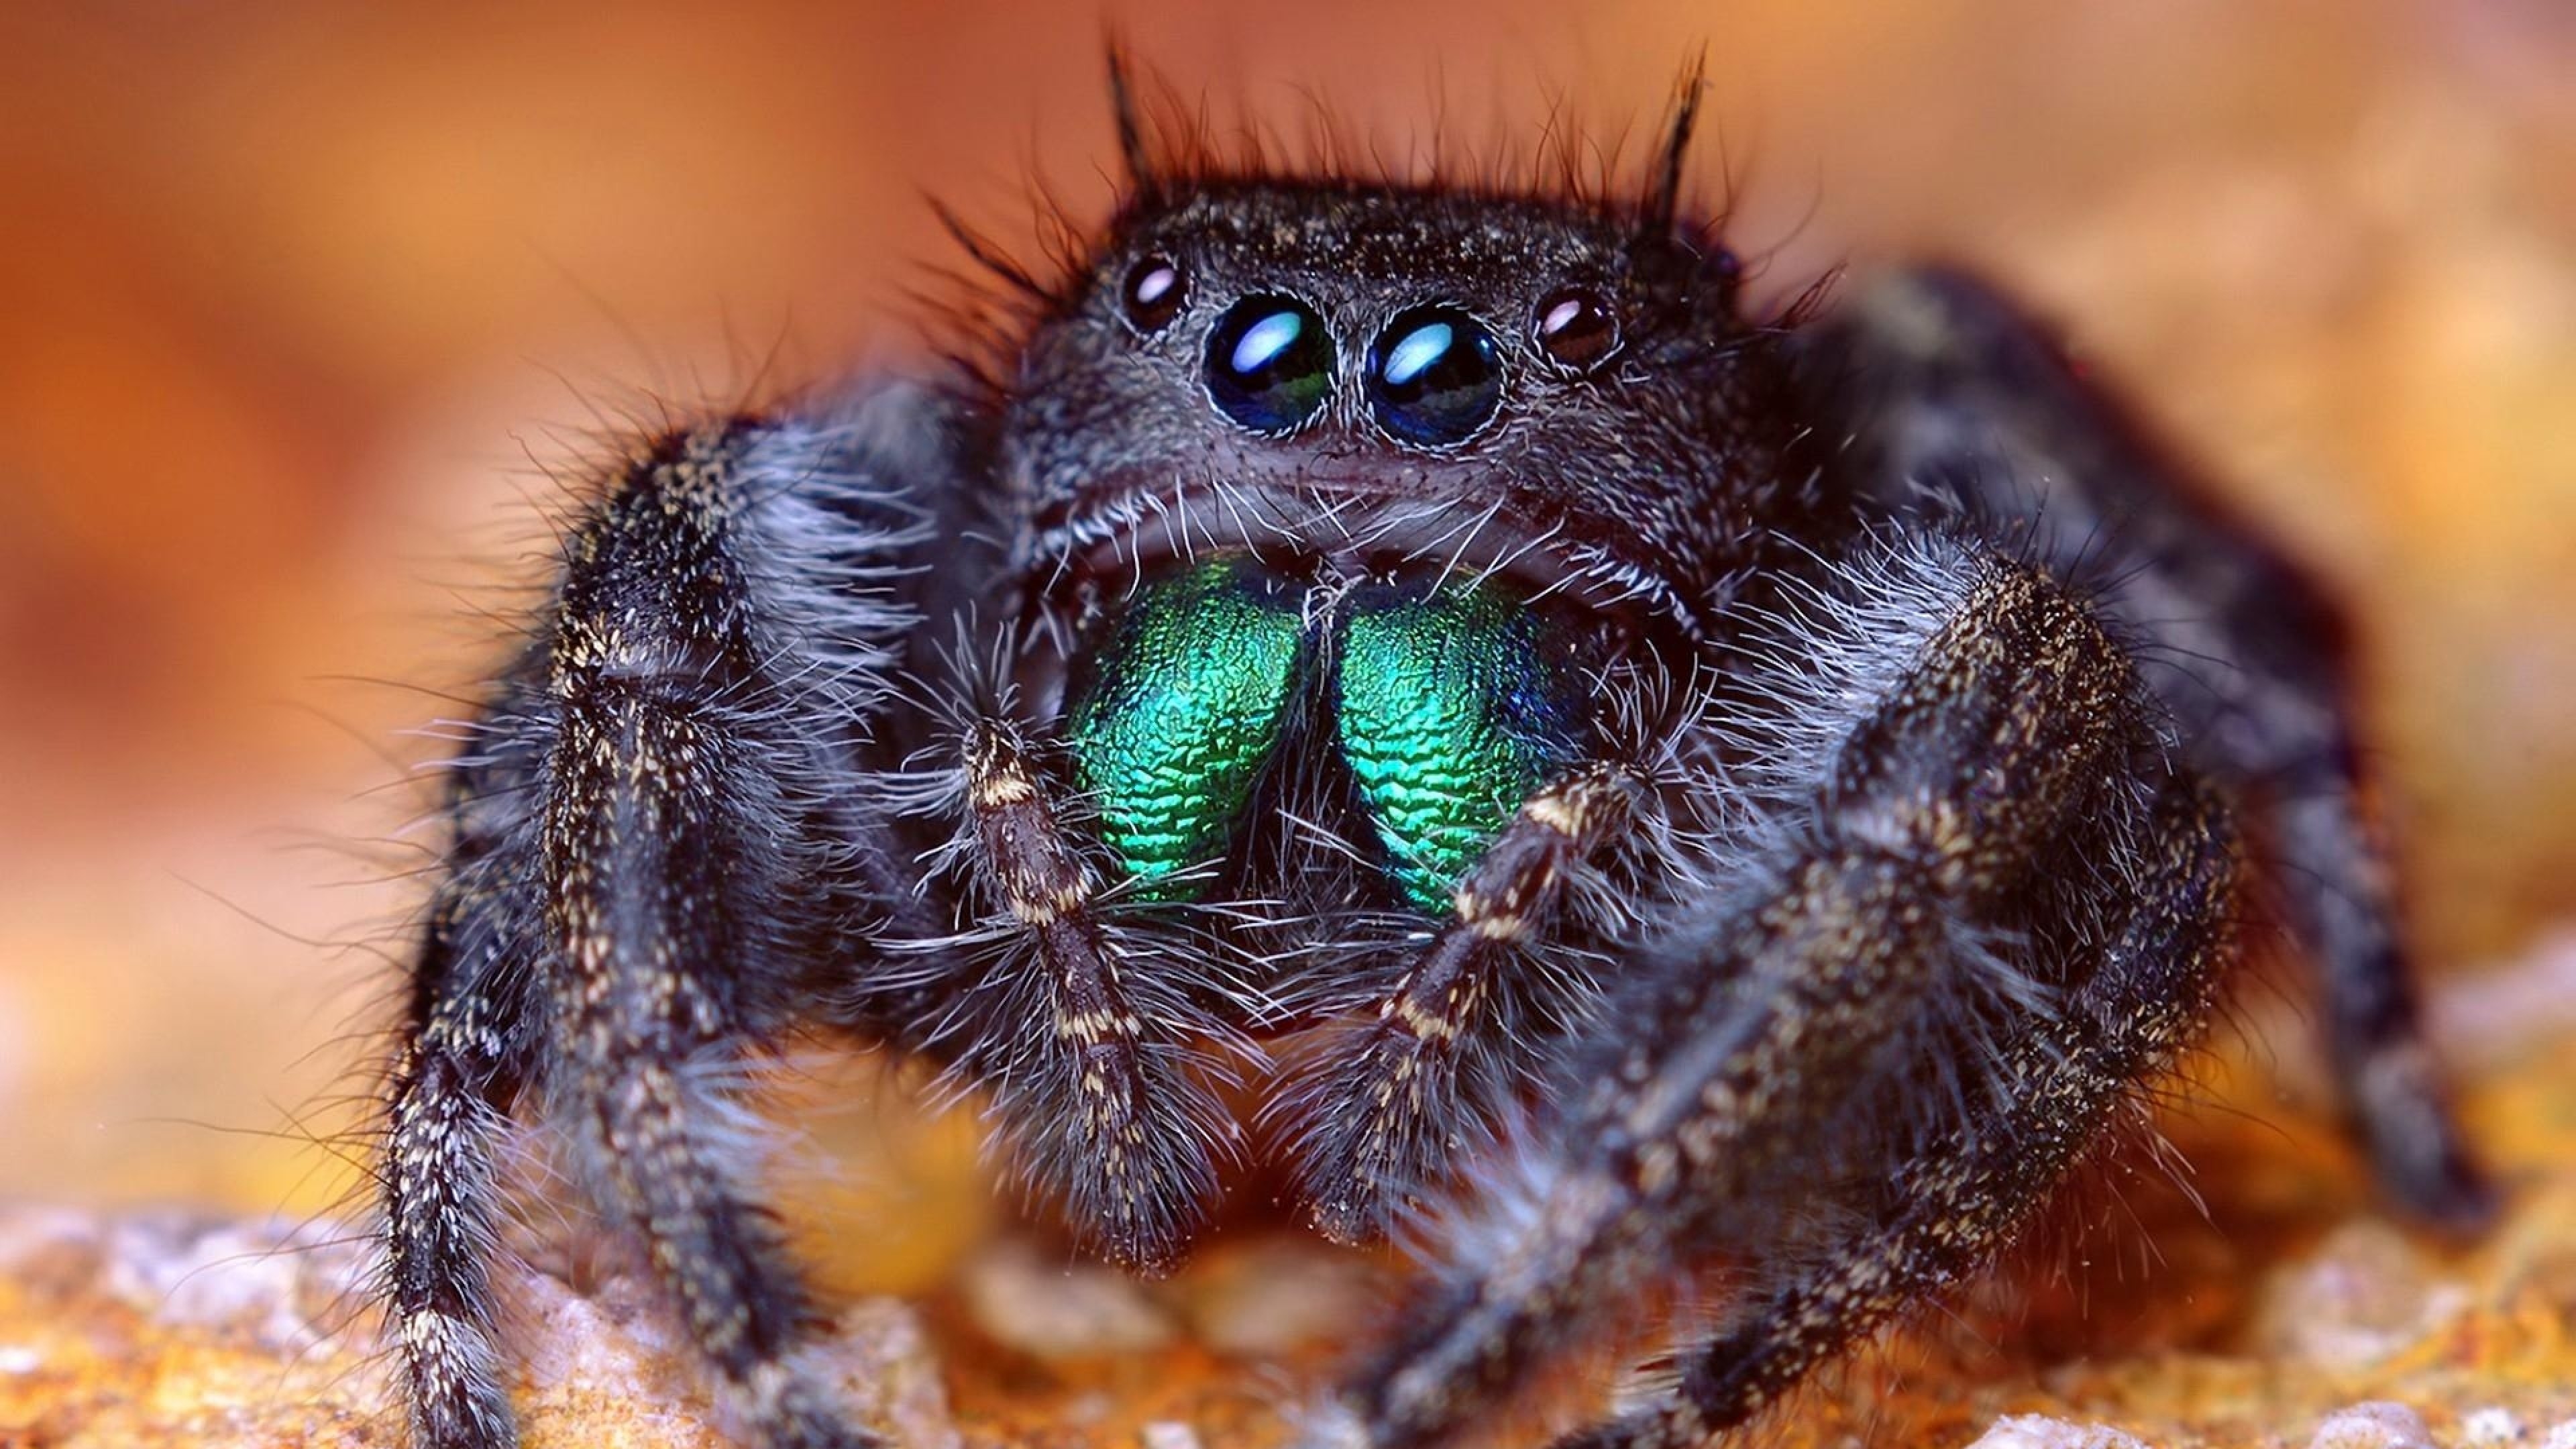 Wallpaper spider, eyes, legs, awesome